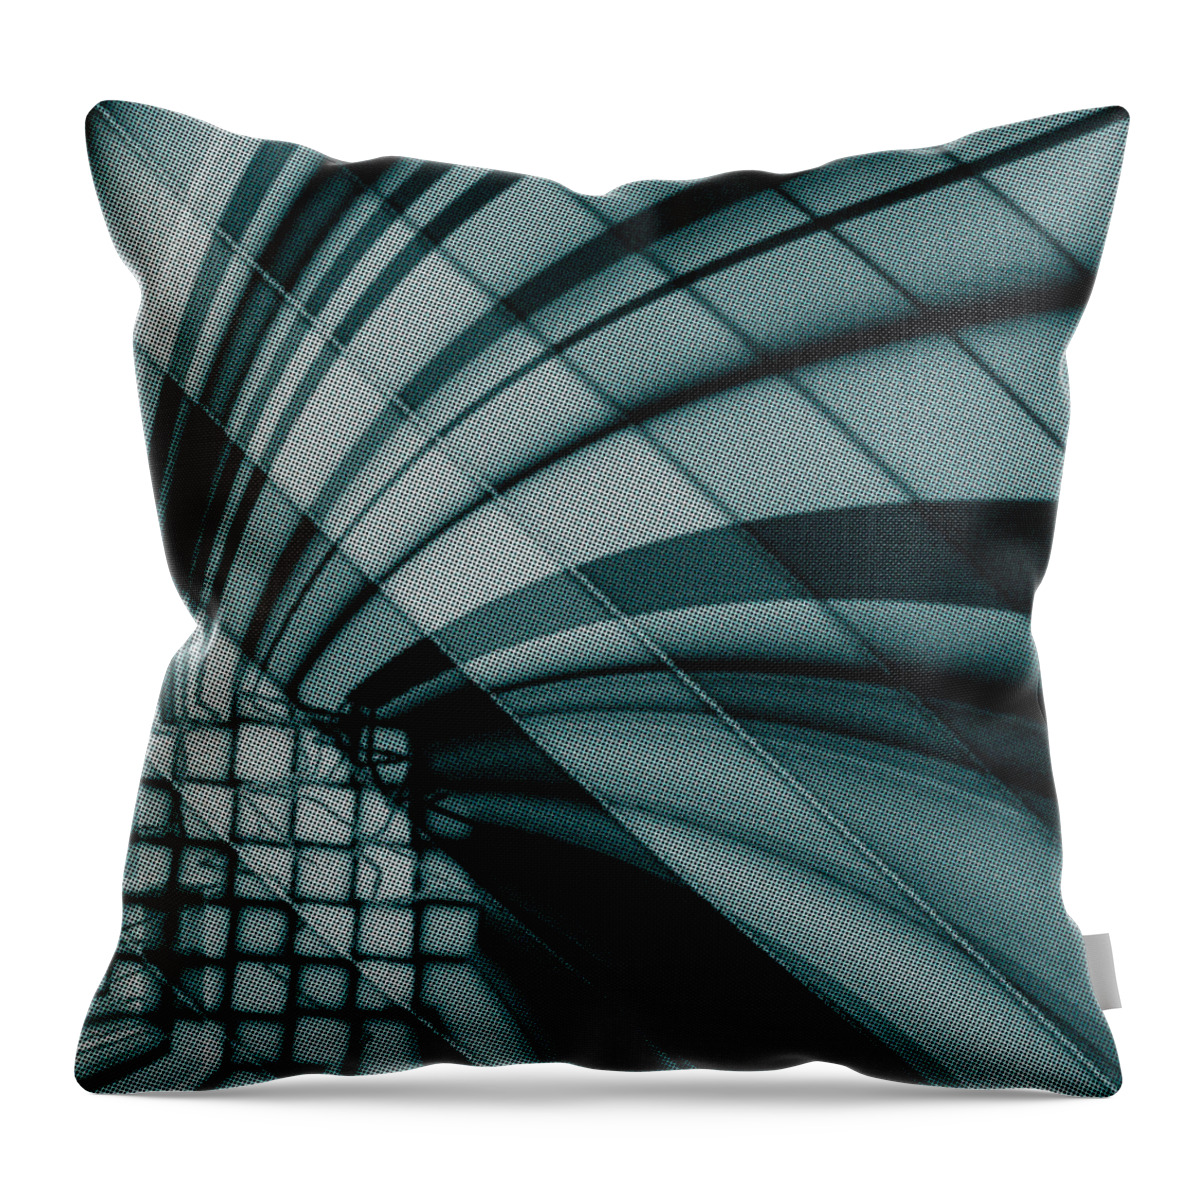 Abstract Throw Pillow featuring the digital art Pattern 32 by Marko Sabotin